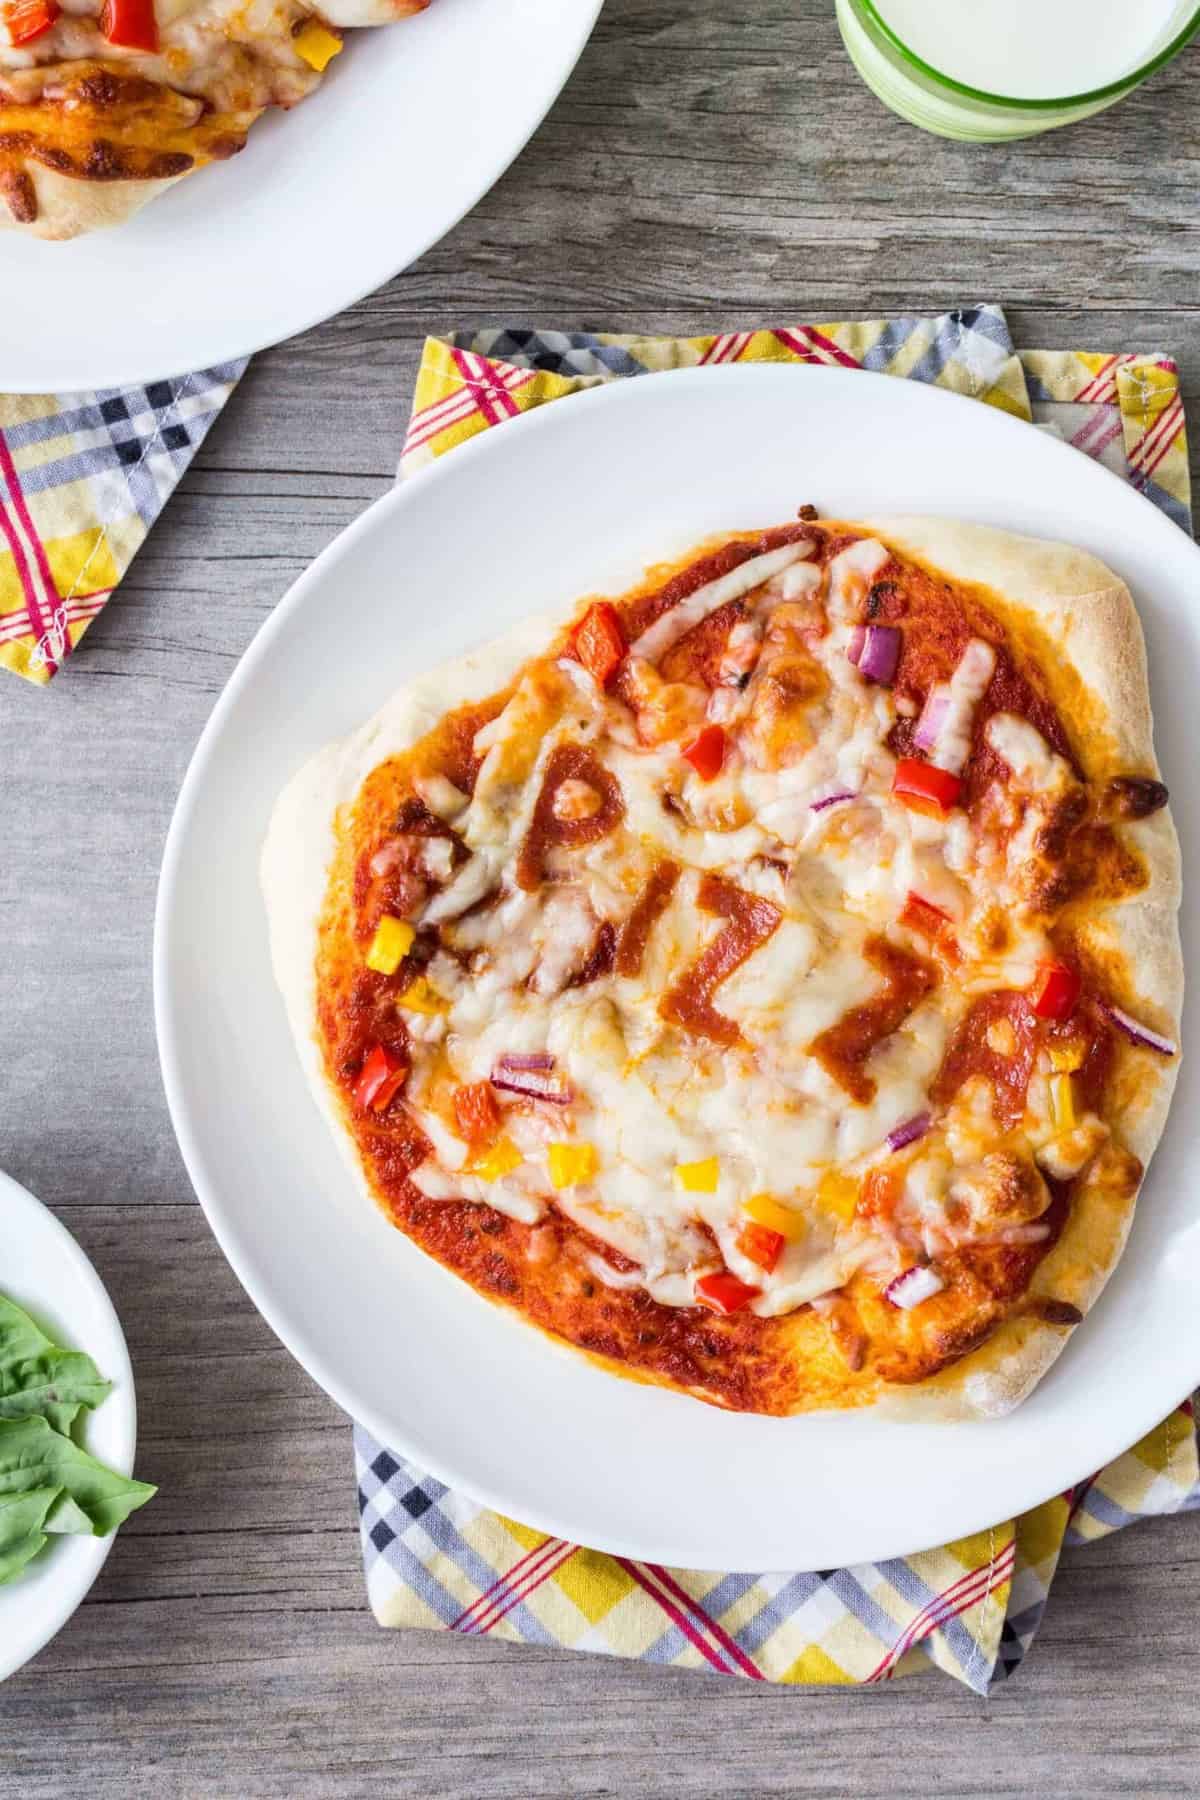 30 Minute Pizza Crust is quick and easy because there is no need for rising time. Divide the dough into mini crusts so everyone can create their own pizza. So perfect for pizza parties!